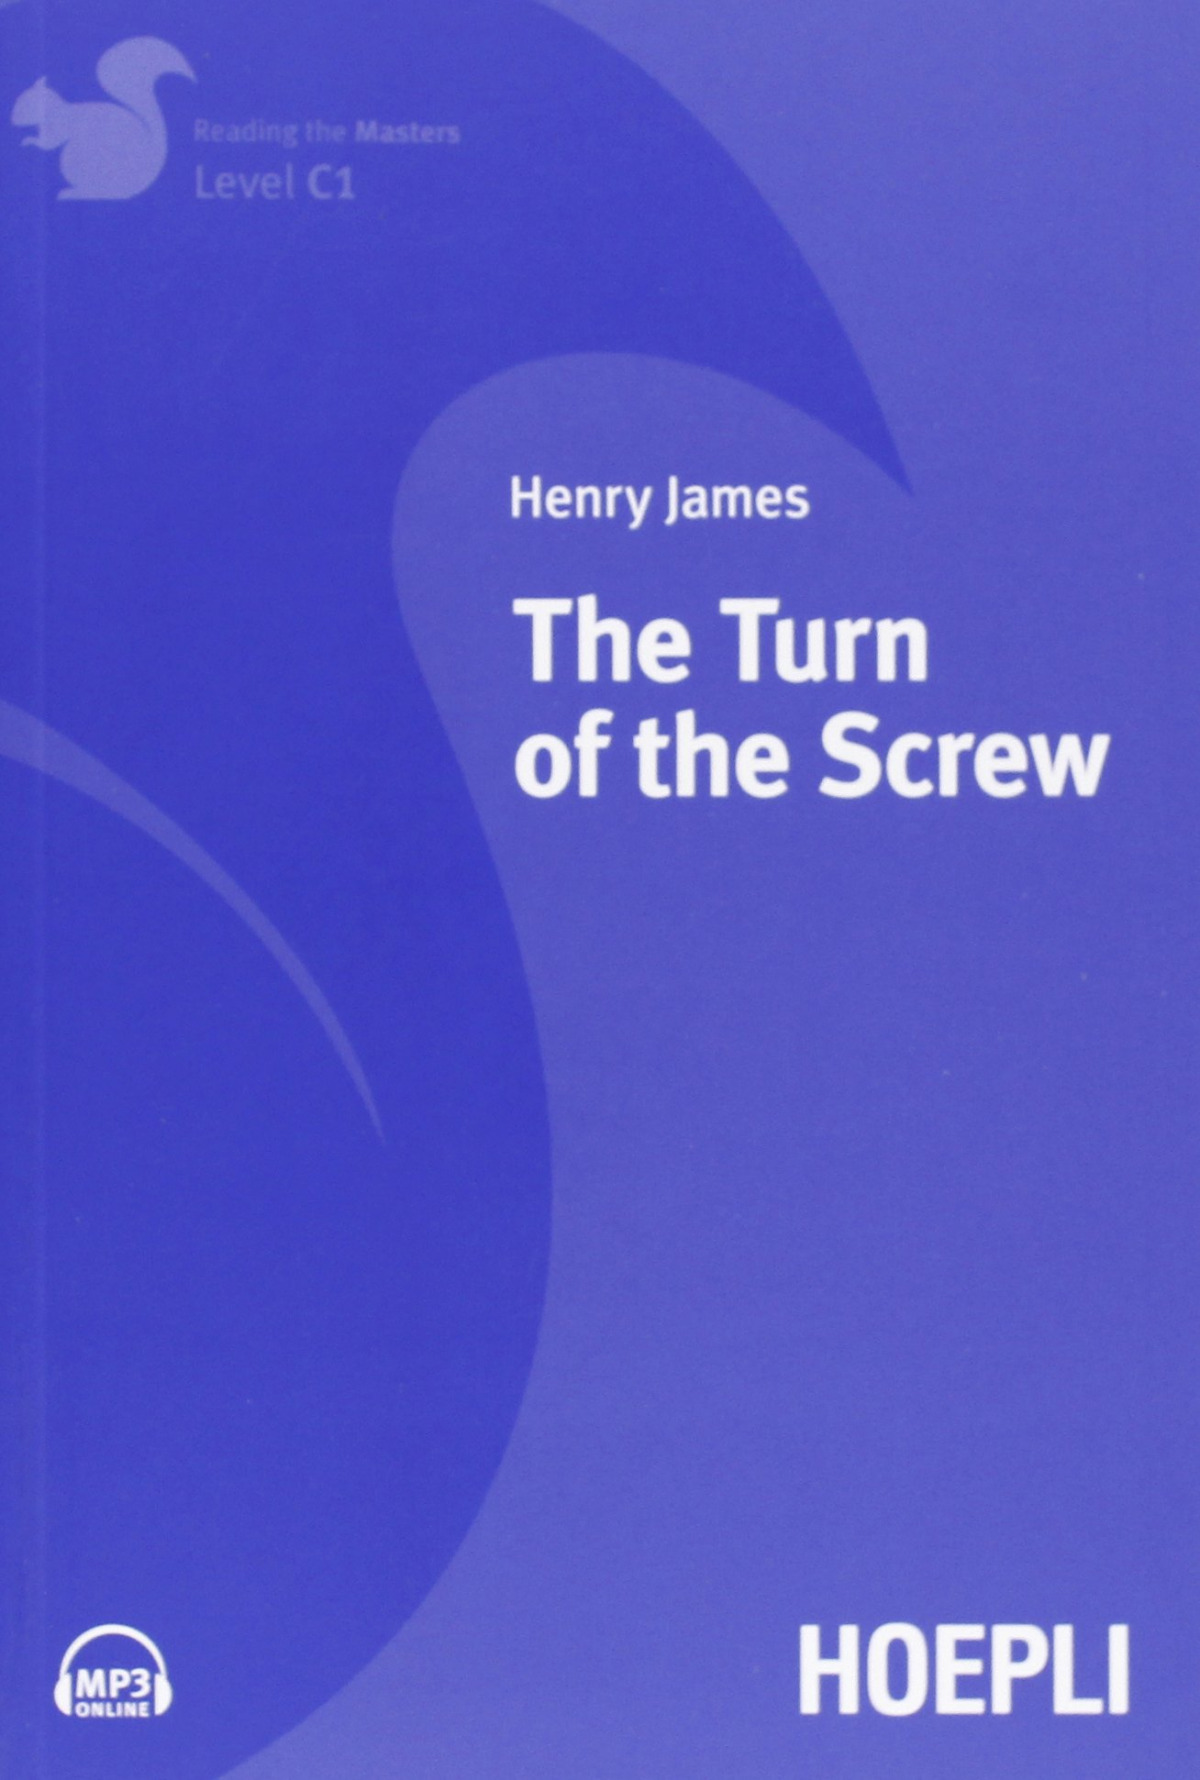 The Turn of the Screw - Henry, James